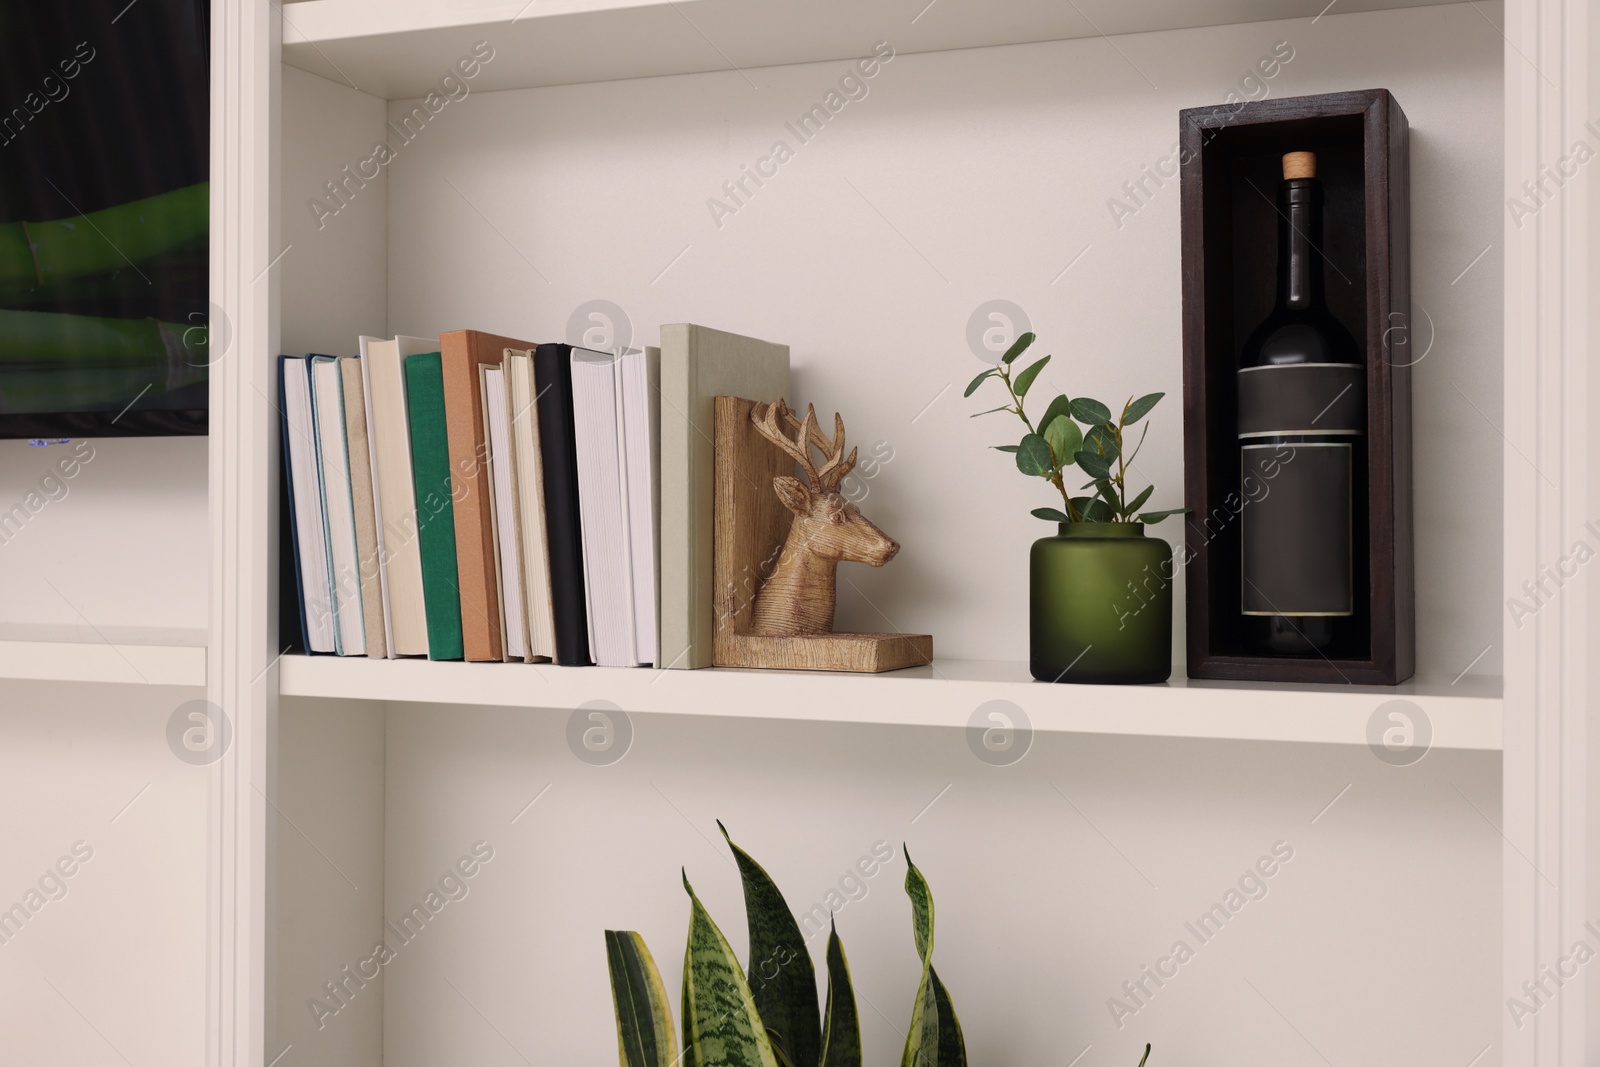 Photo of Shelves with houseplants, books and wine bottle indoors. Interior design